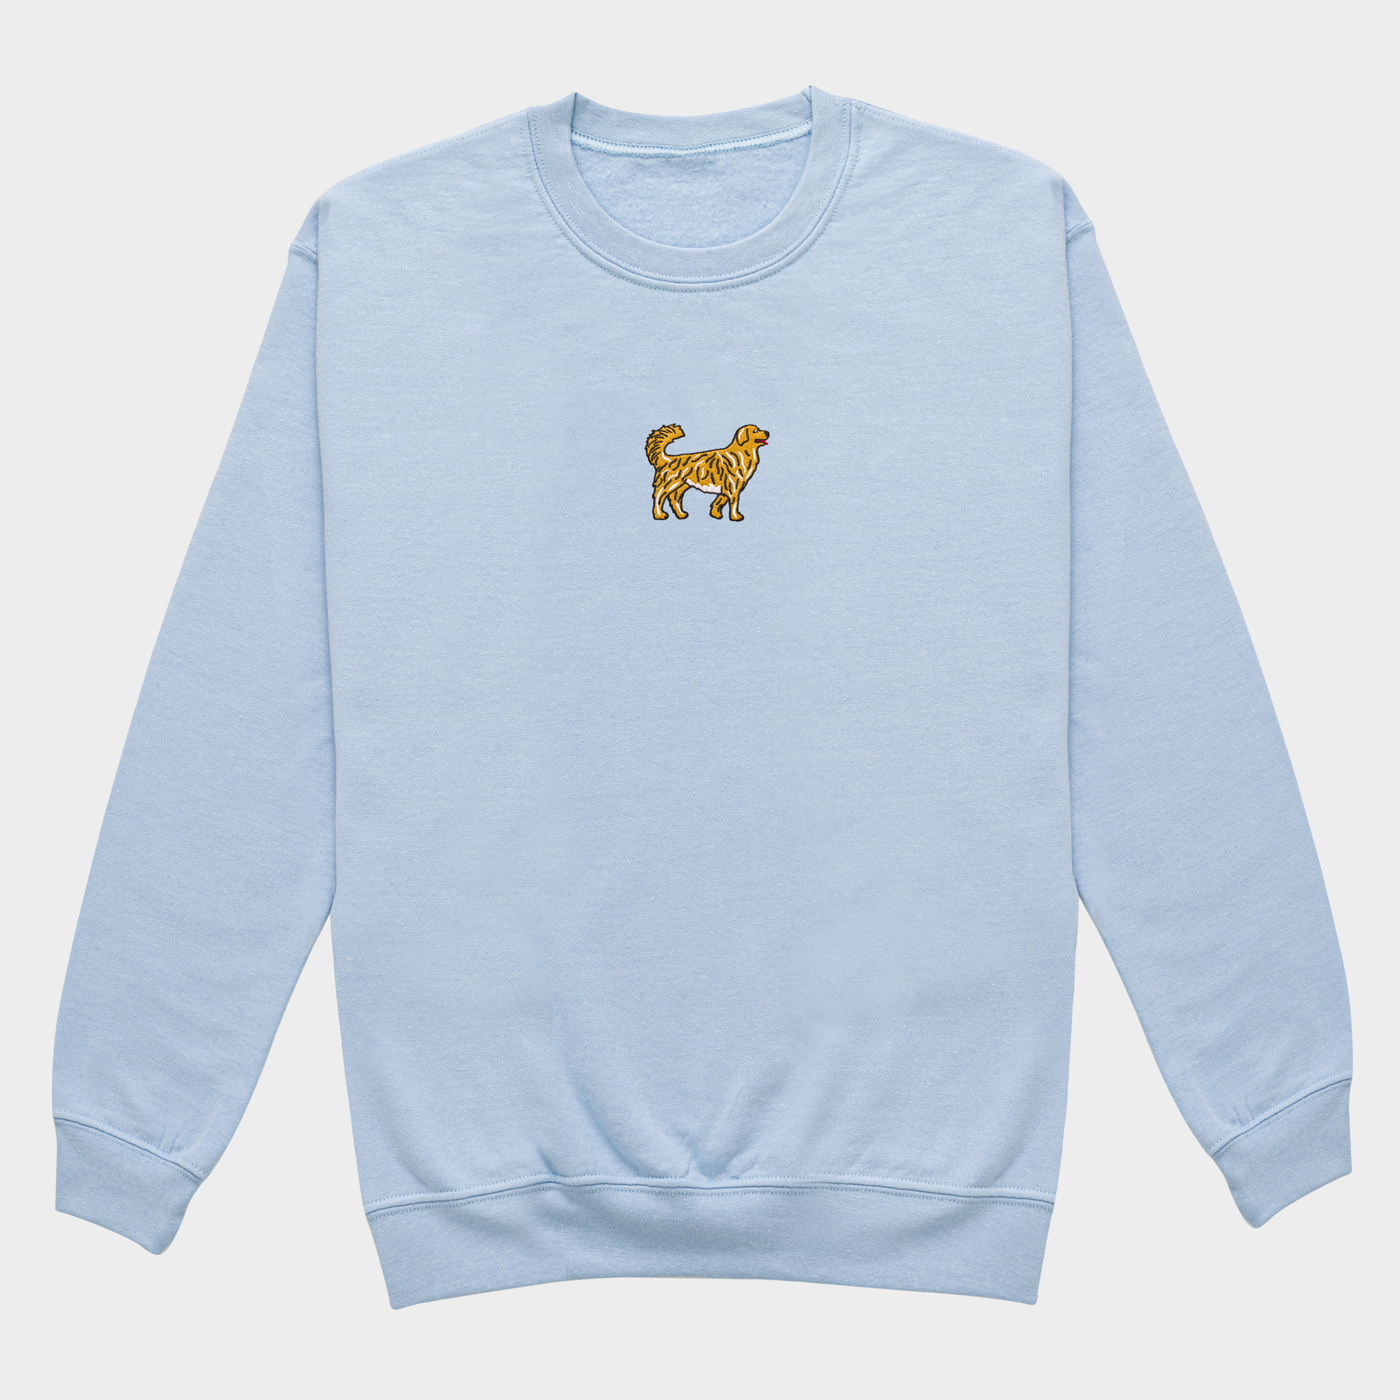 Bobby's Planet Women's Embroidered Golden Retriever Sweatshirt from Paws Dog Cat Animals Collection in Light Blue Color#color_light-blue